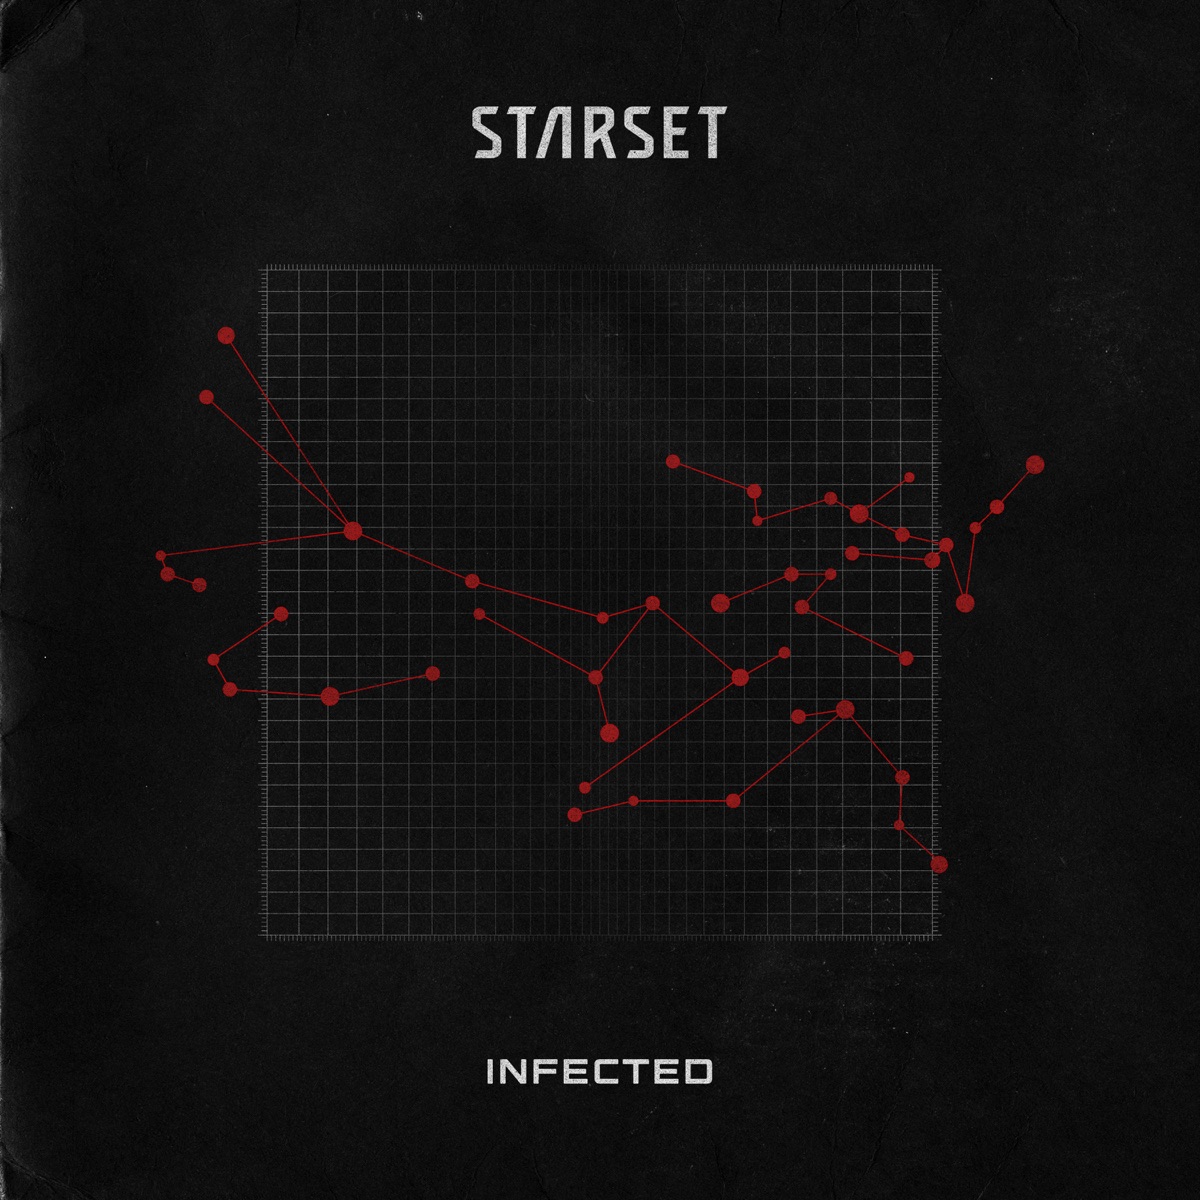 Cover for『STARSET - INFECTED』from the release『INFECTED』